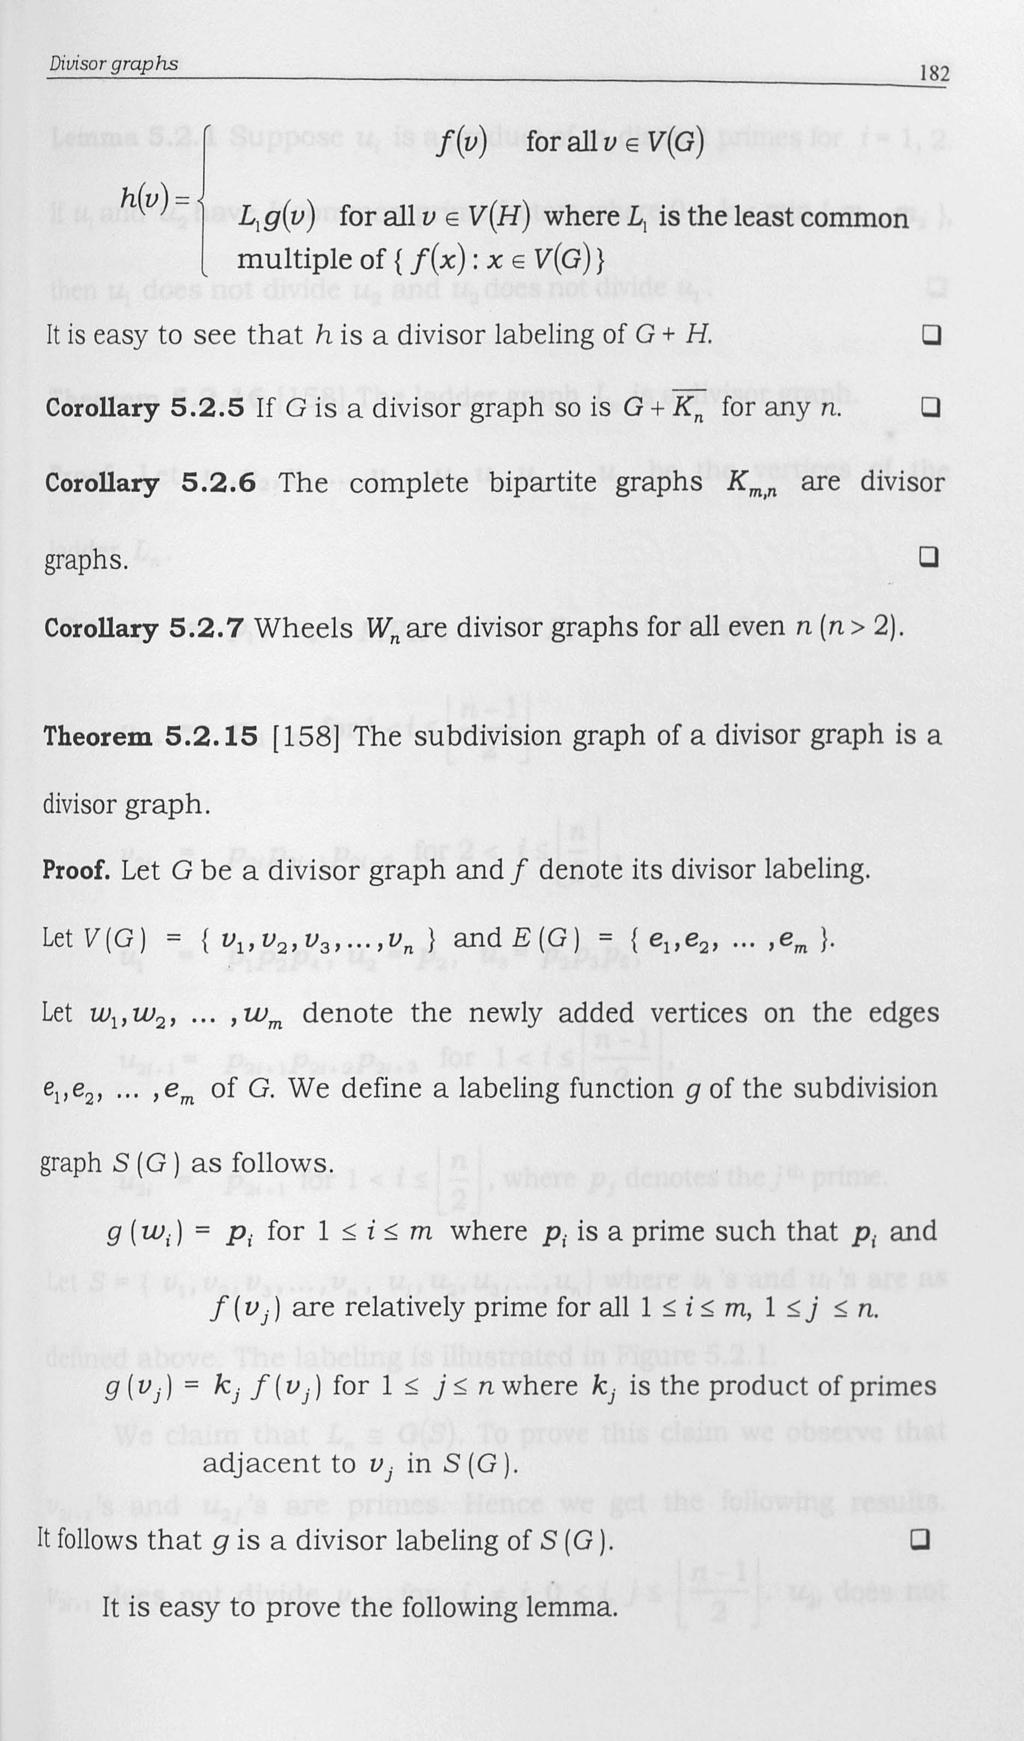 Divisor graphs 182 h(v) = f(v) for all v E V(G) L1g(v) for all v E V(H) where L 1 is the least common multiple of {f(x): x E V(G)} It is easy to see that h is a divisor labeling of G + H.